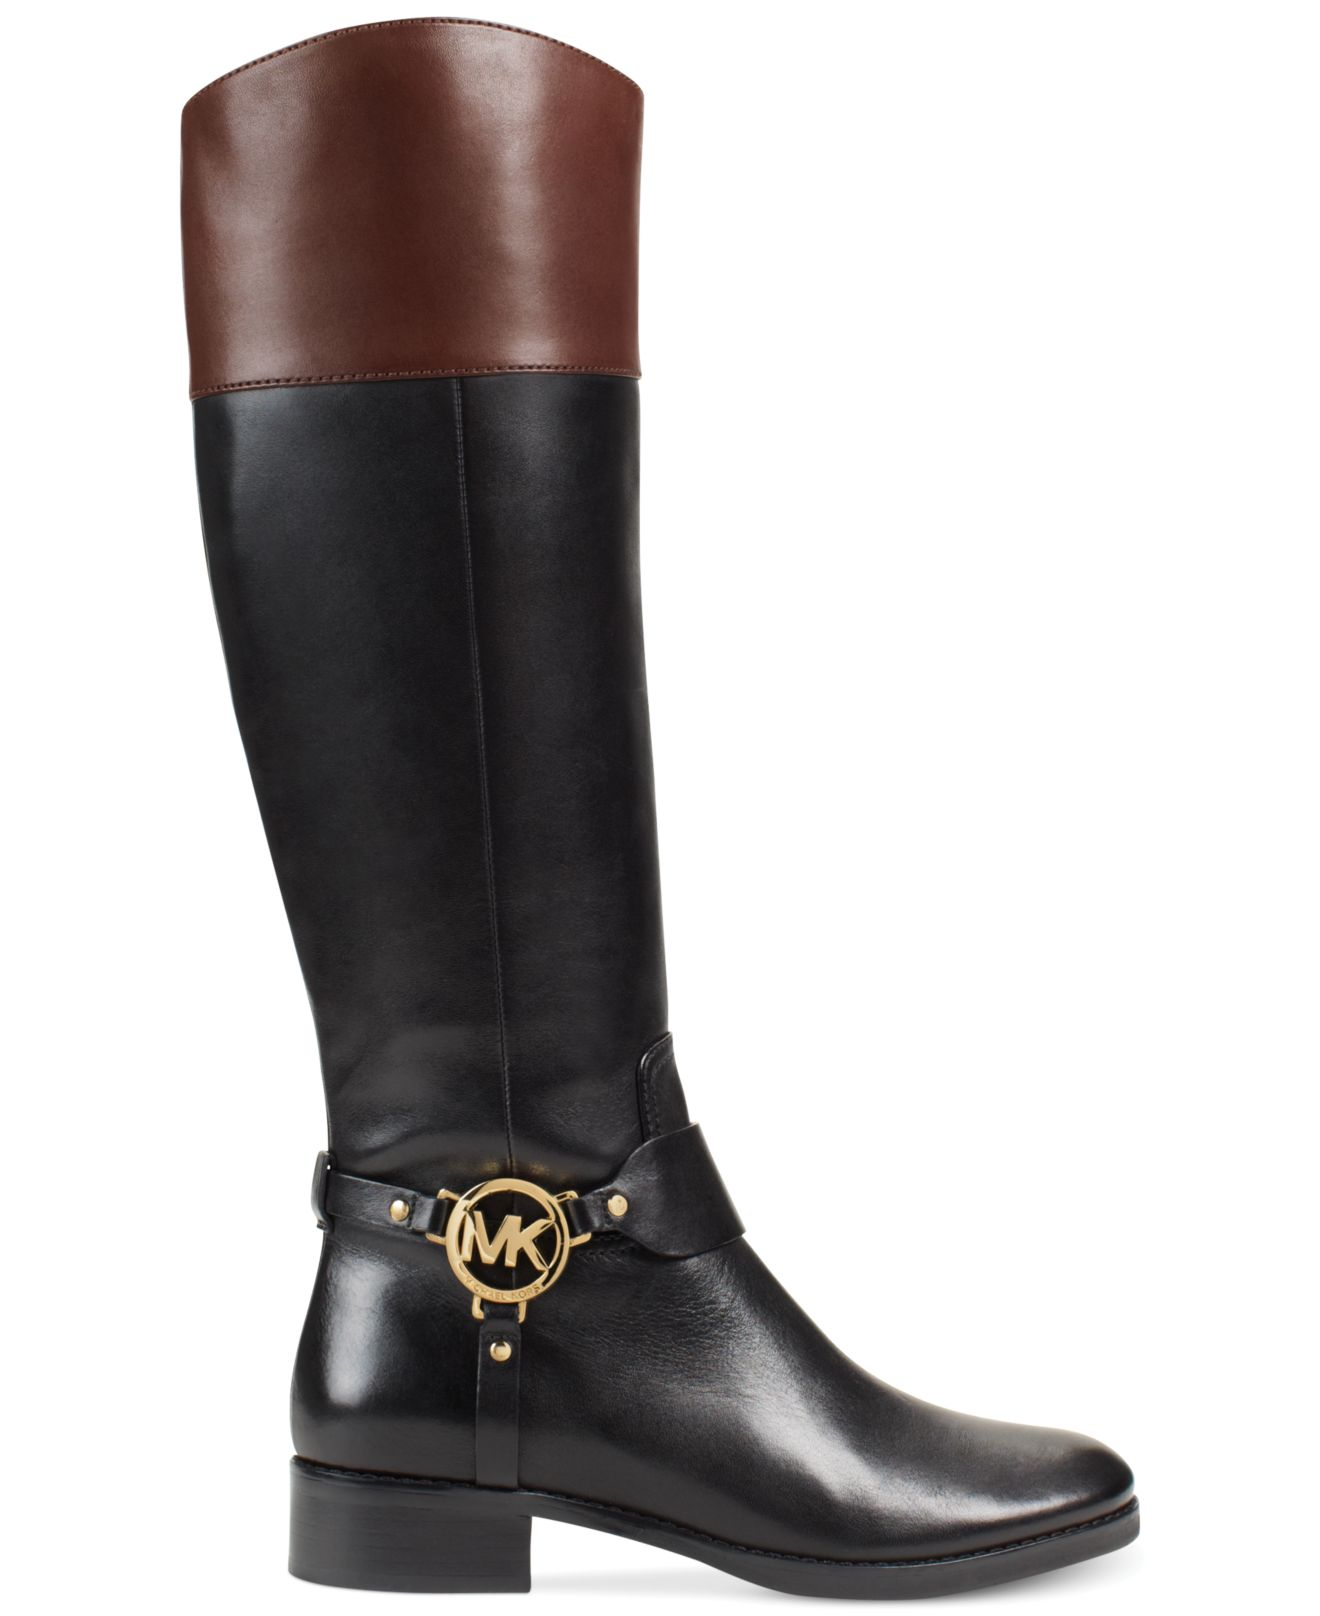 Total 45+ imagen michael kors boots lord and taylor - Abzlocal.mx